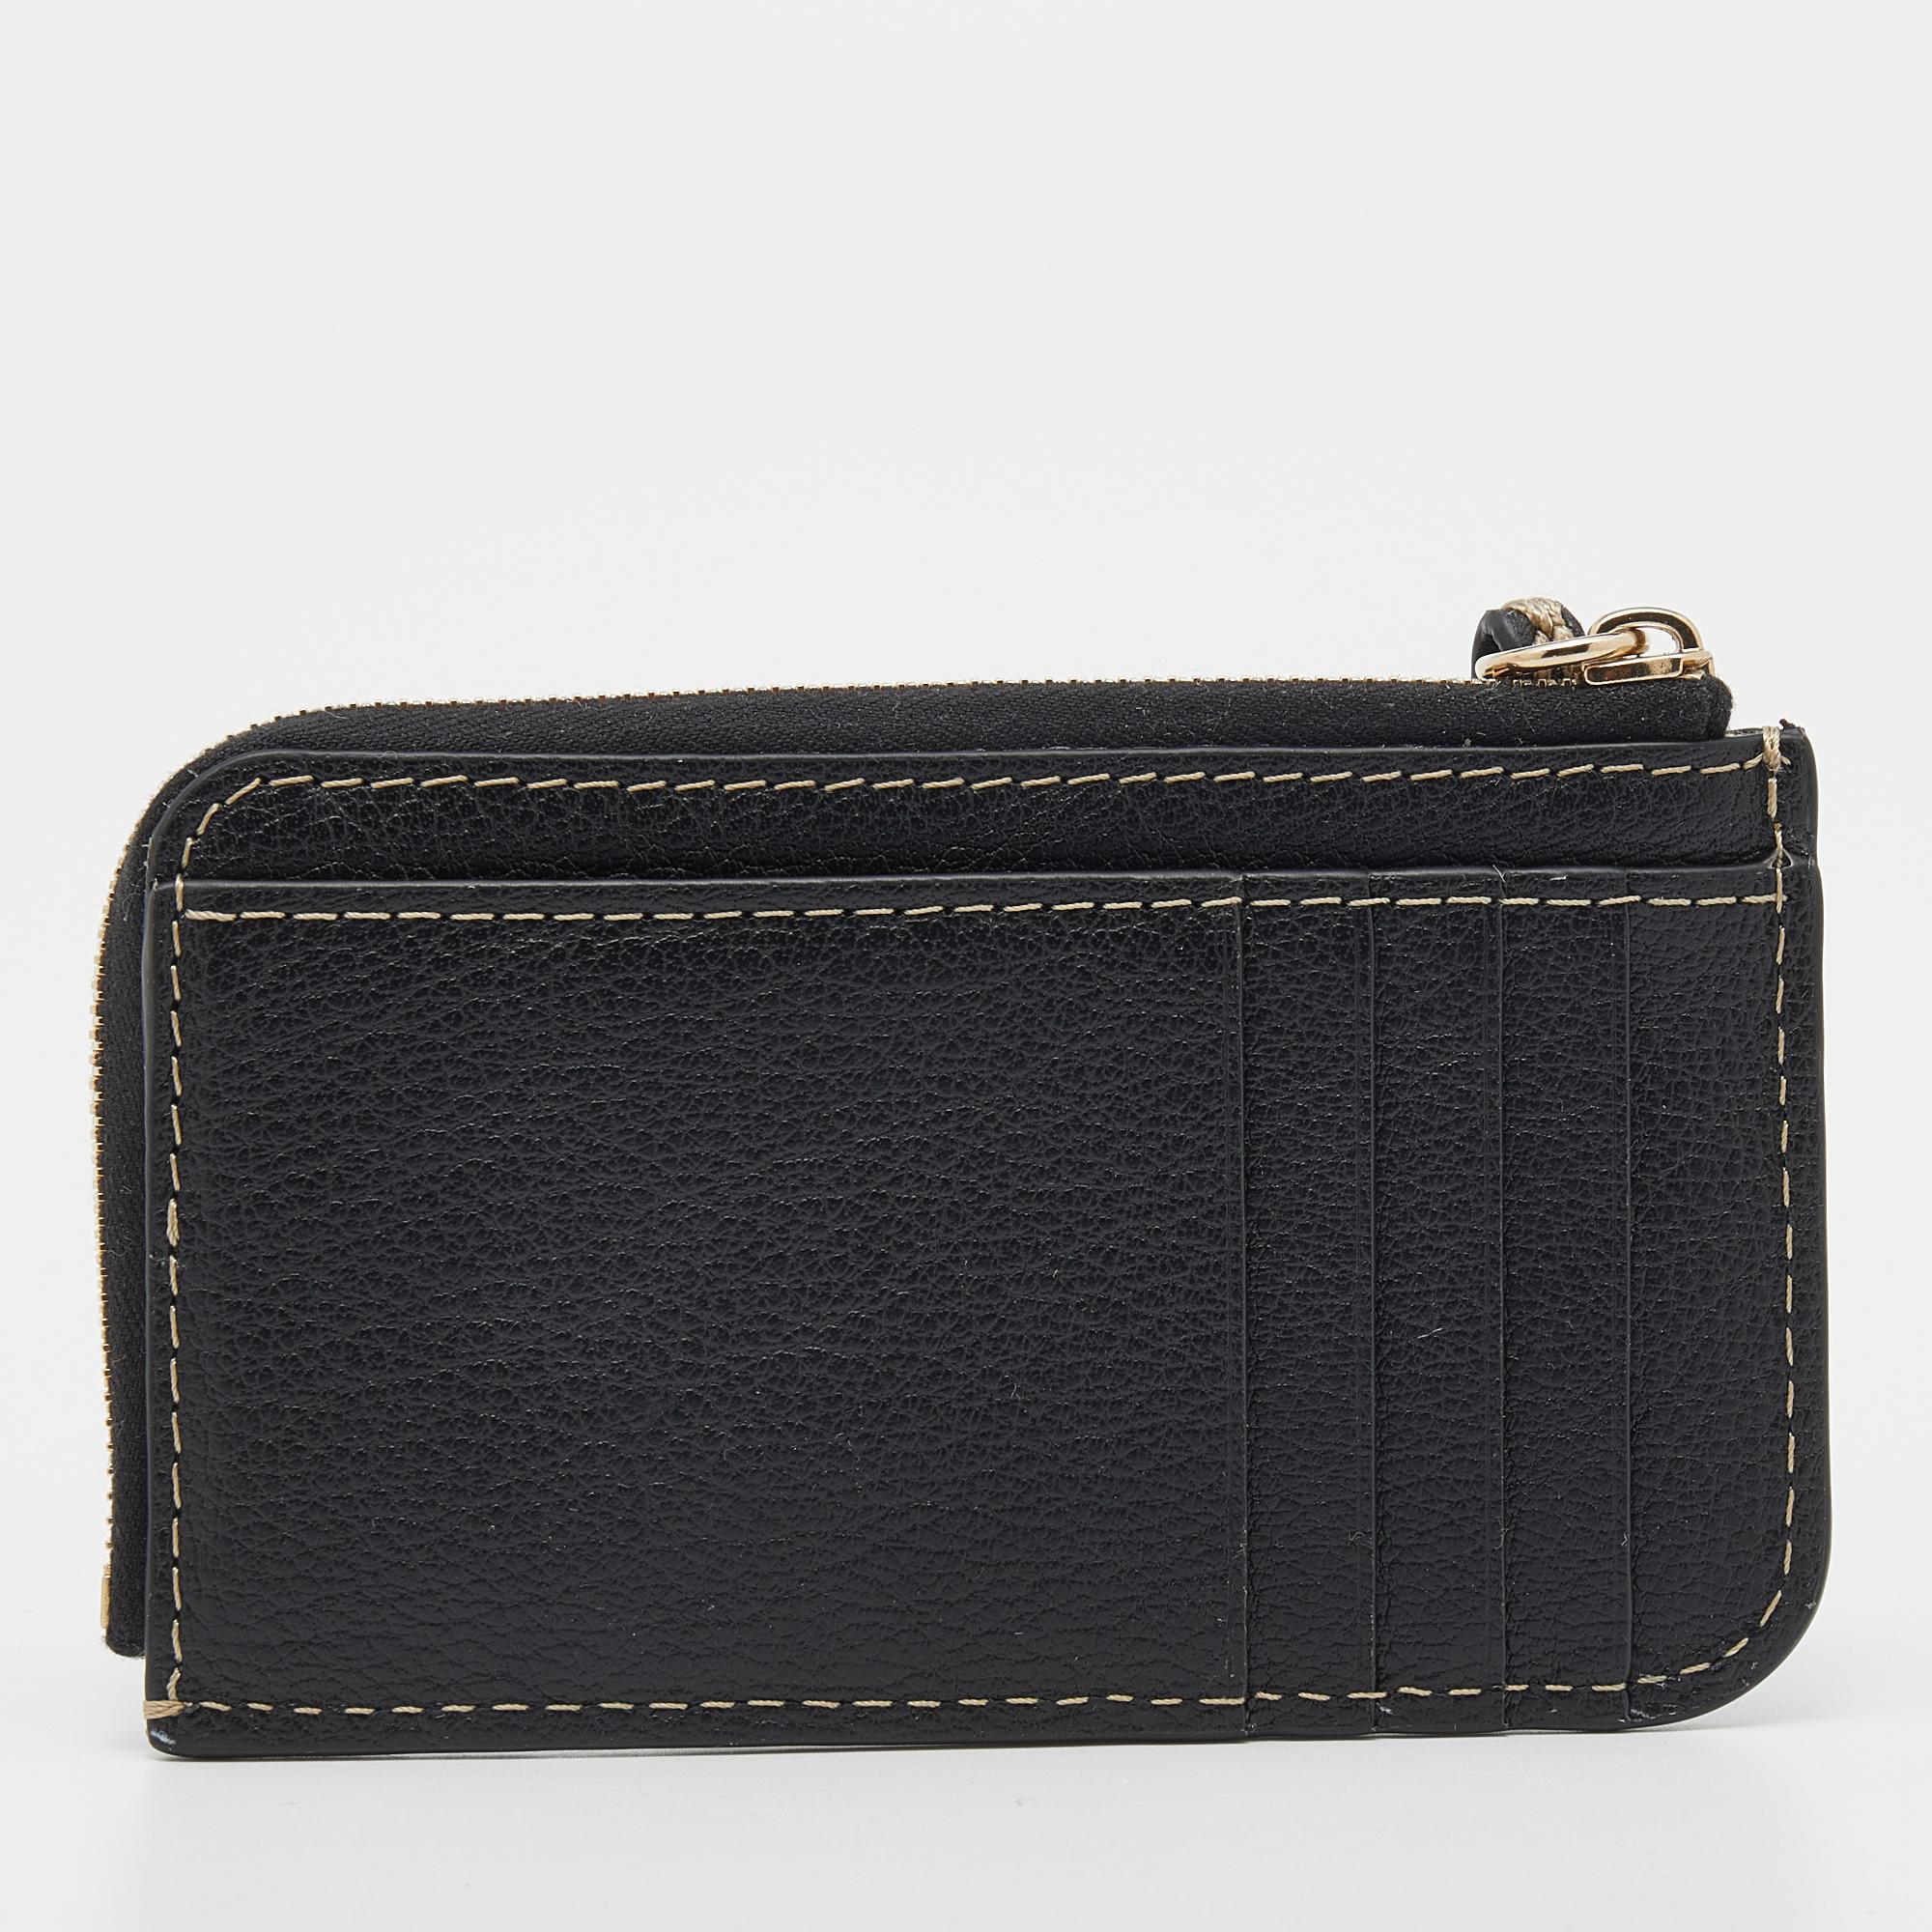 This chic cardholder by Chloe exudes class and sophistication. Crafted from leather, it comes in a black shade. It features a top zip closure, a fabric interior sized to hold your essentials, multiple card slots on the front, and a zip pull. This